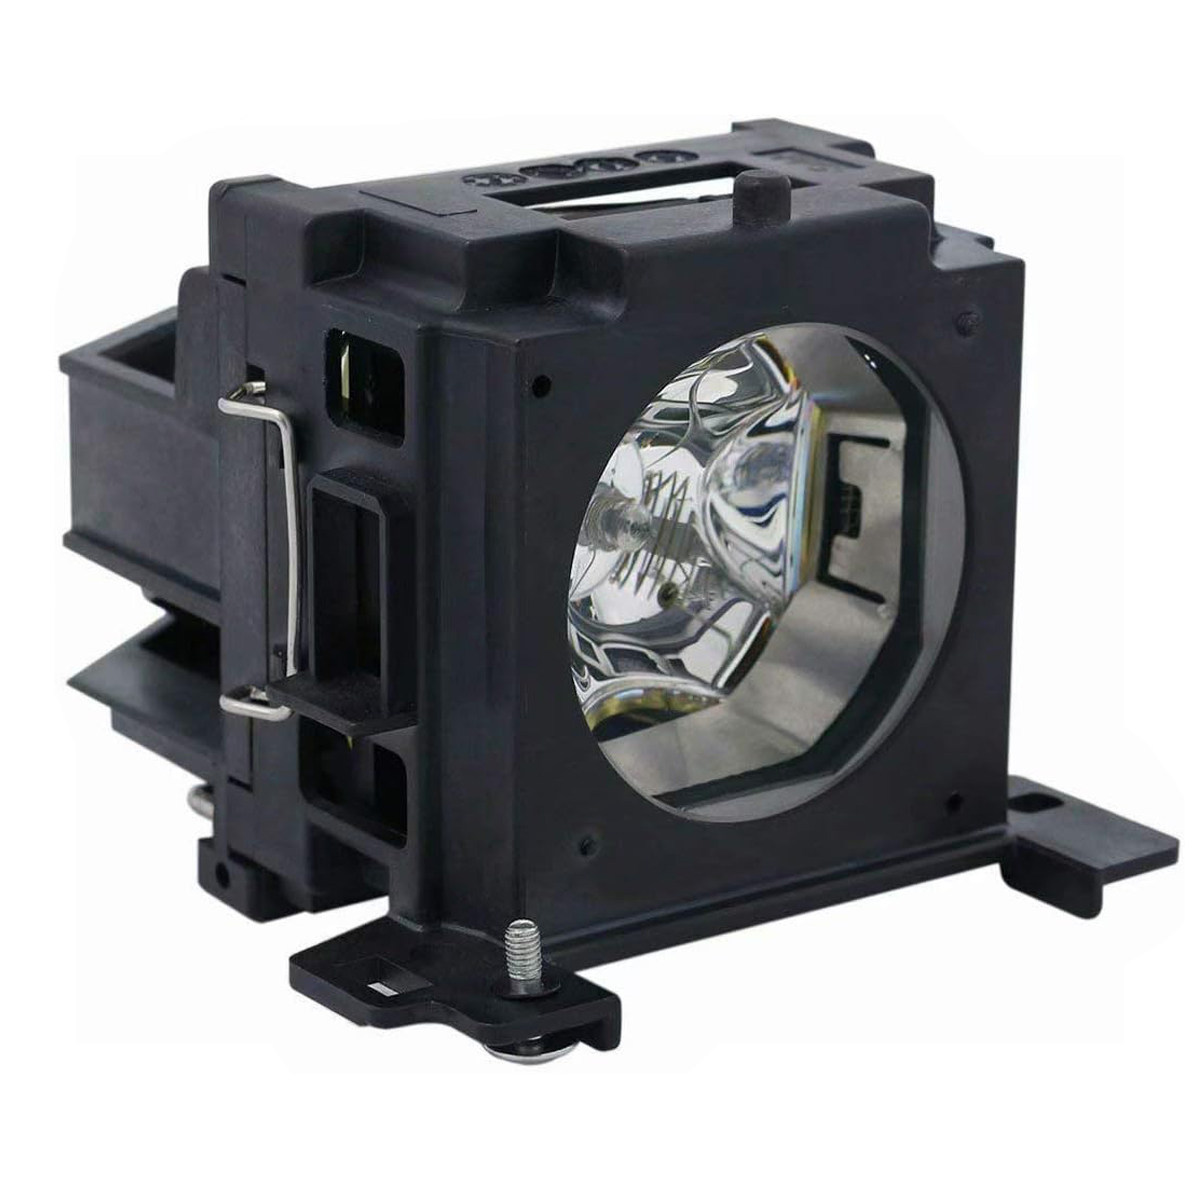 Replacement Projector lamp DT00757 For Hitachi CP-X251 CP-X256 CP-HX2090 CP-HX3280